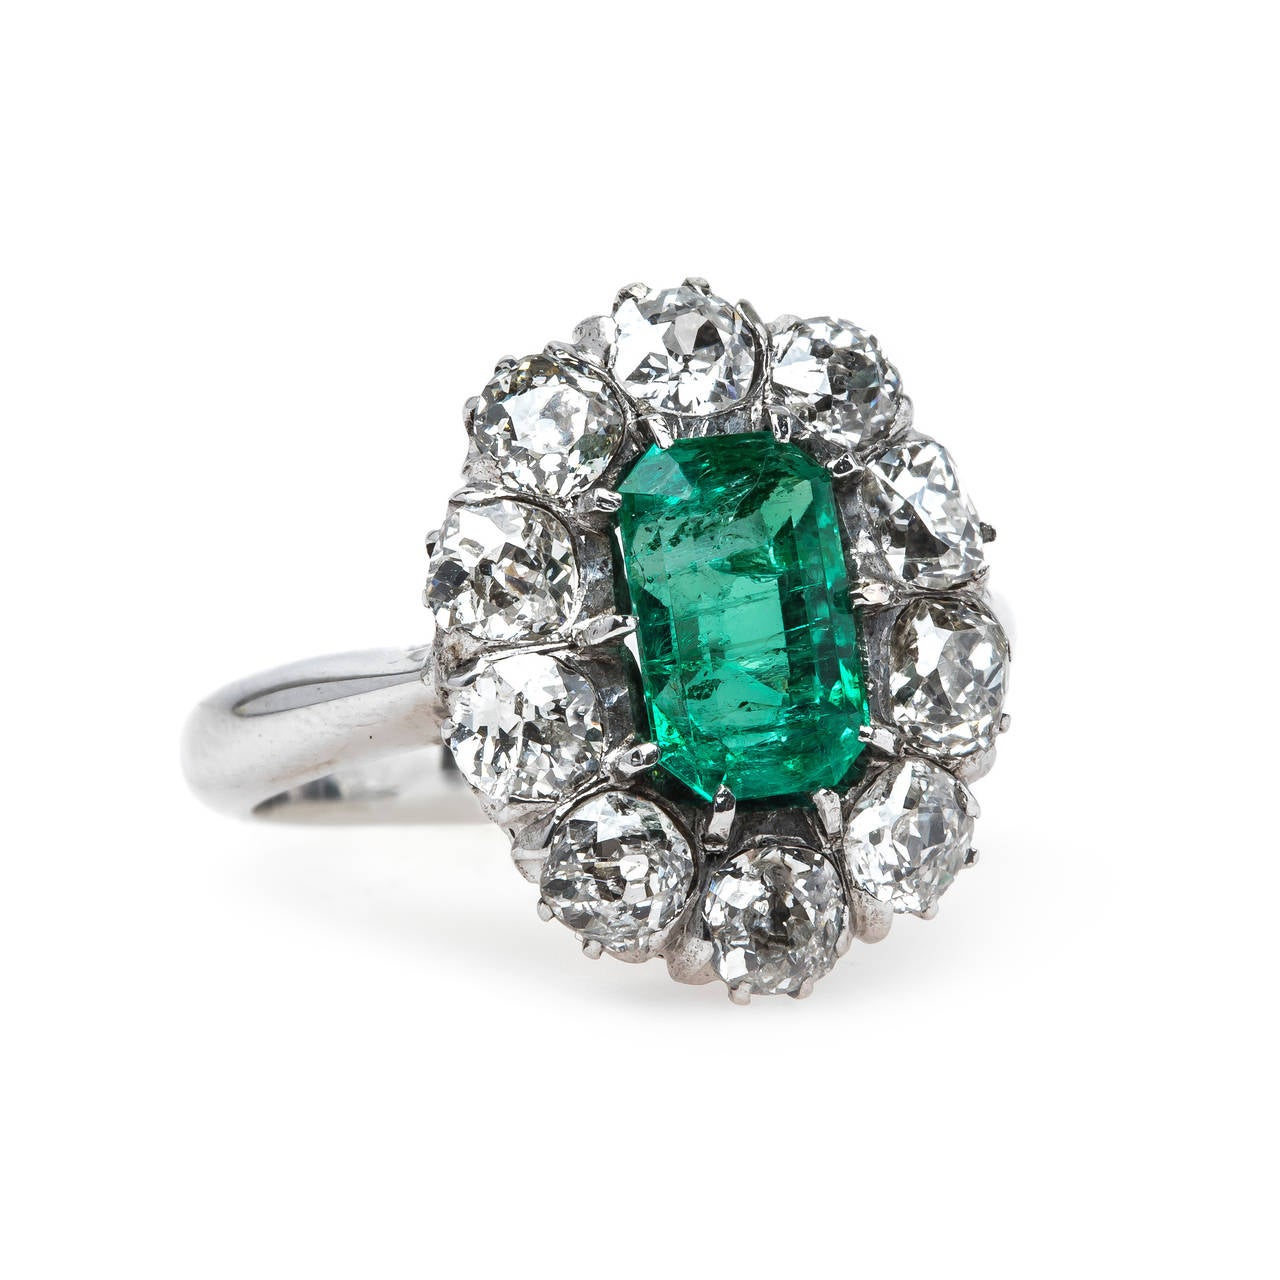 Joshua Tree is a fantastic authentic Late Art Deco (circa 1930) 14k white gold cluster ring centering a luscious rectangular Step-Cut natural emerald, approximately 1.30ct accompanied with a Guild Laboratories certificate stating the emerald is